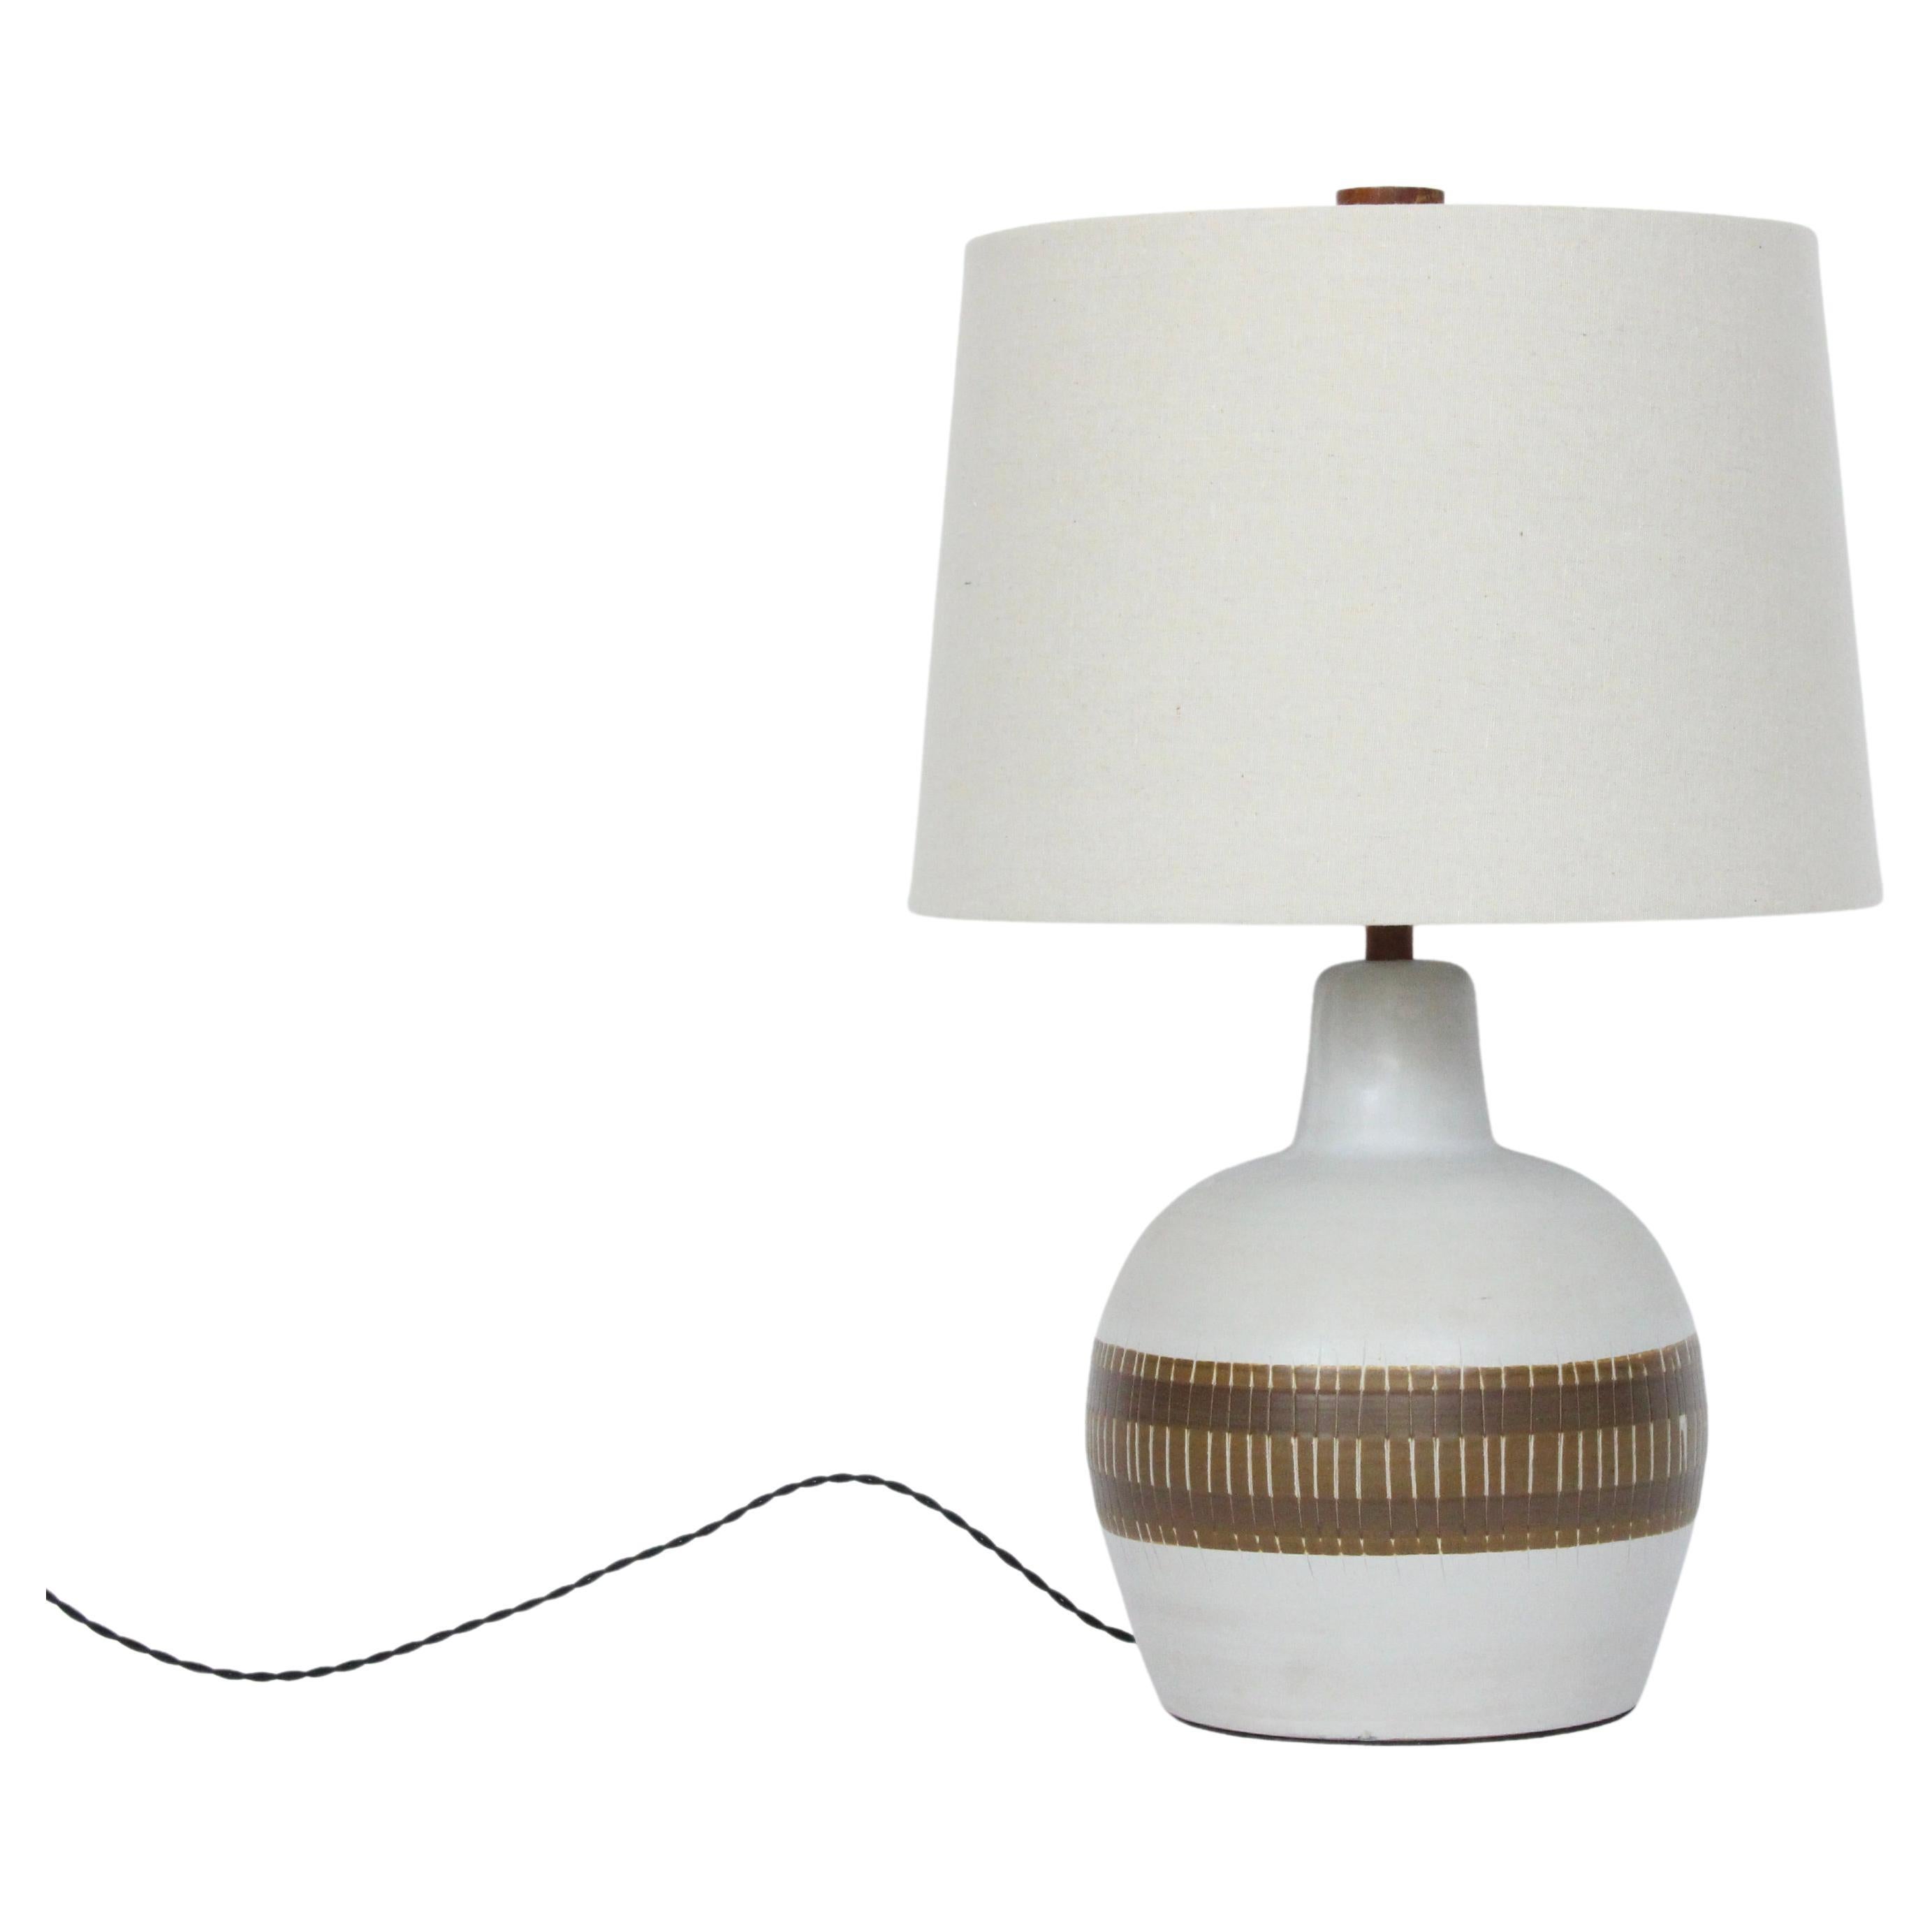 American Mid-Century Modern Gordon Martz M51 glazed stoneware table lamp. Featuring a classic handcrafted White M51 form, Walnut neck and finial, hand painted matte glazed two tone Coffee and Taupe banded design with incised detailing. Small